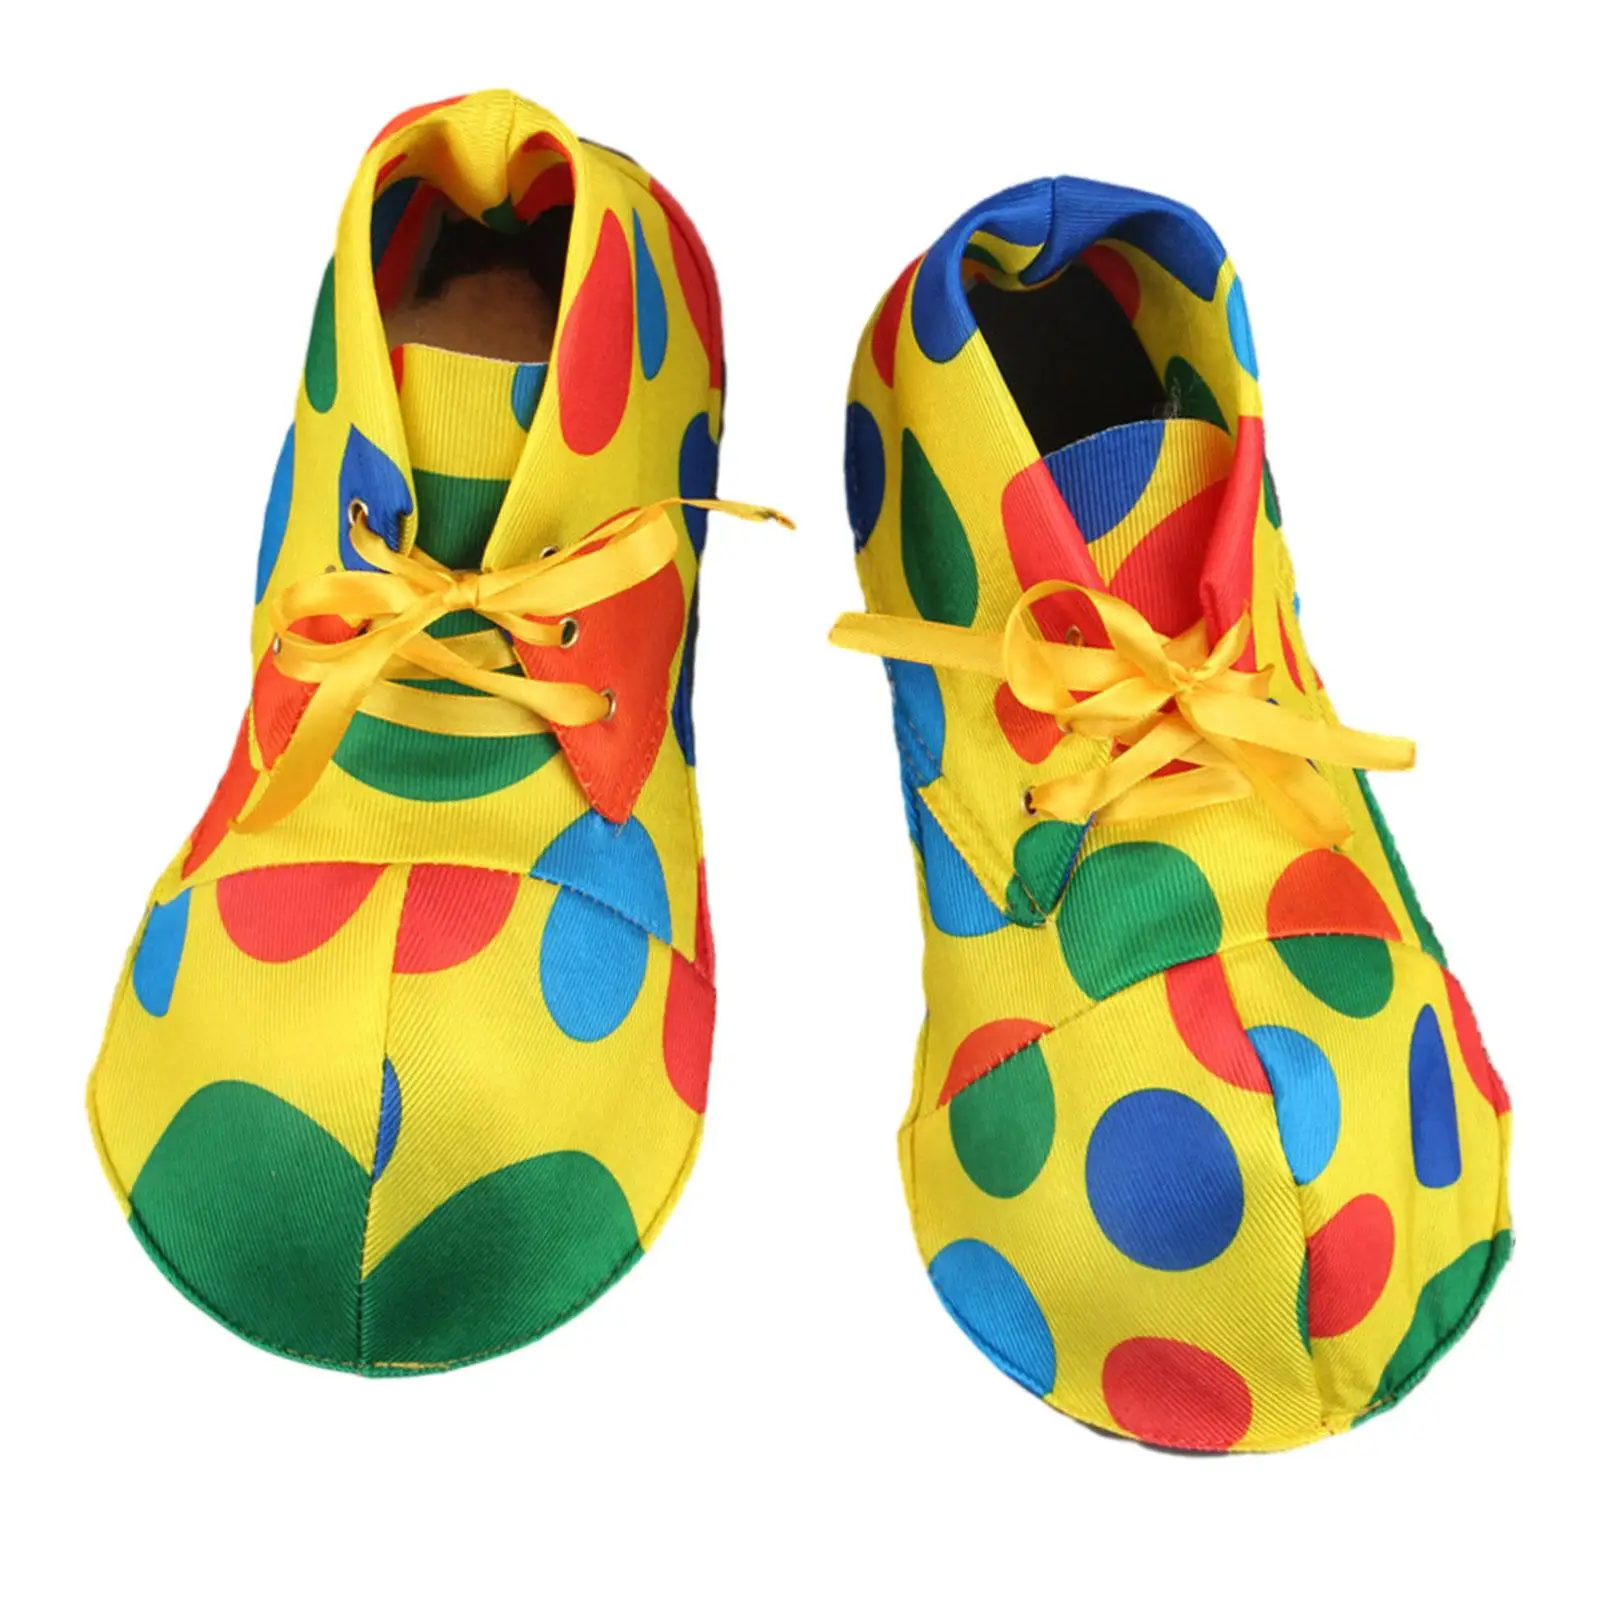 Adult Clown Shoes Dress up Adults Costume Accessories Cute Decorations Novelty Gift Rainbows Shoes Christmas Party Costume